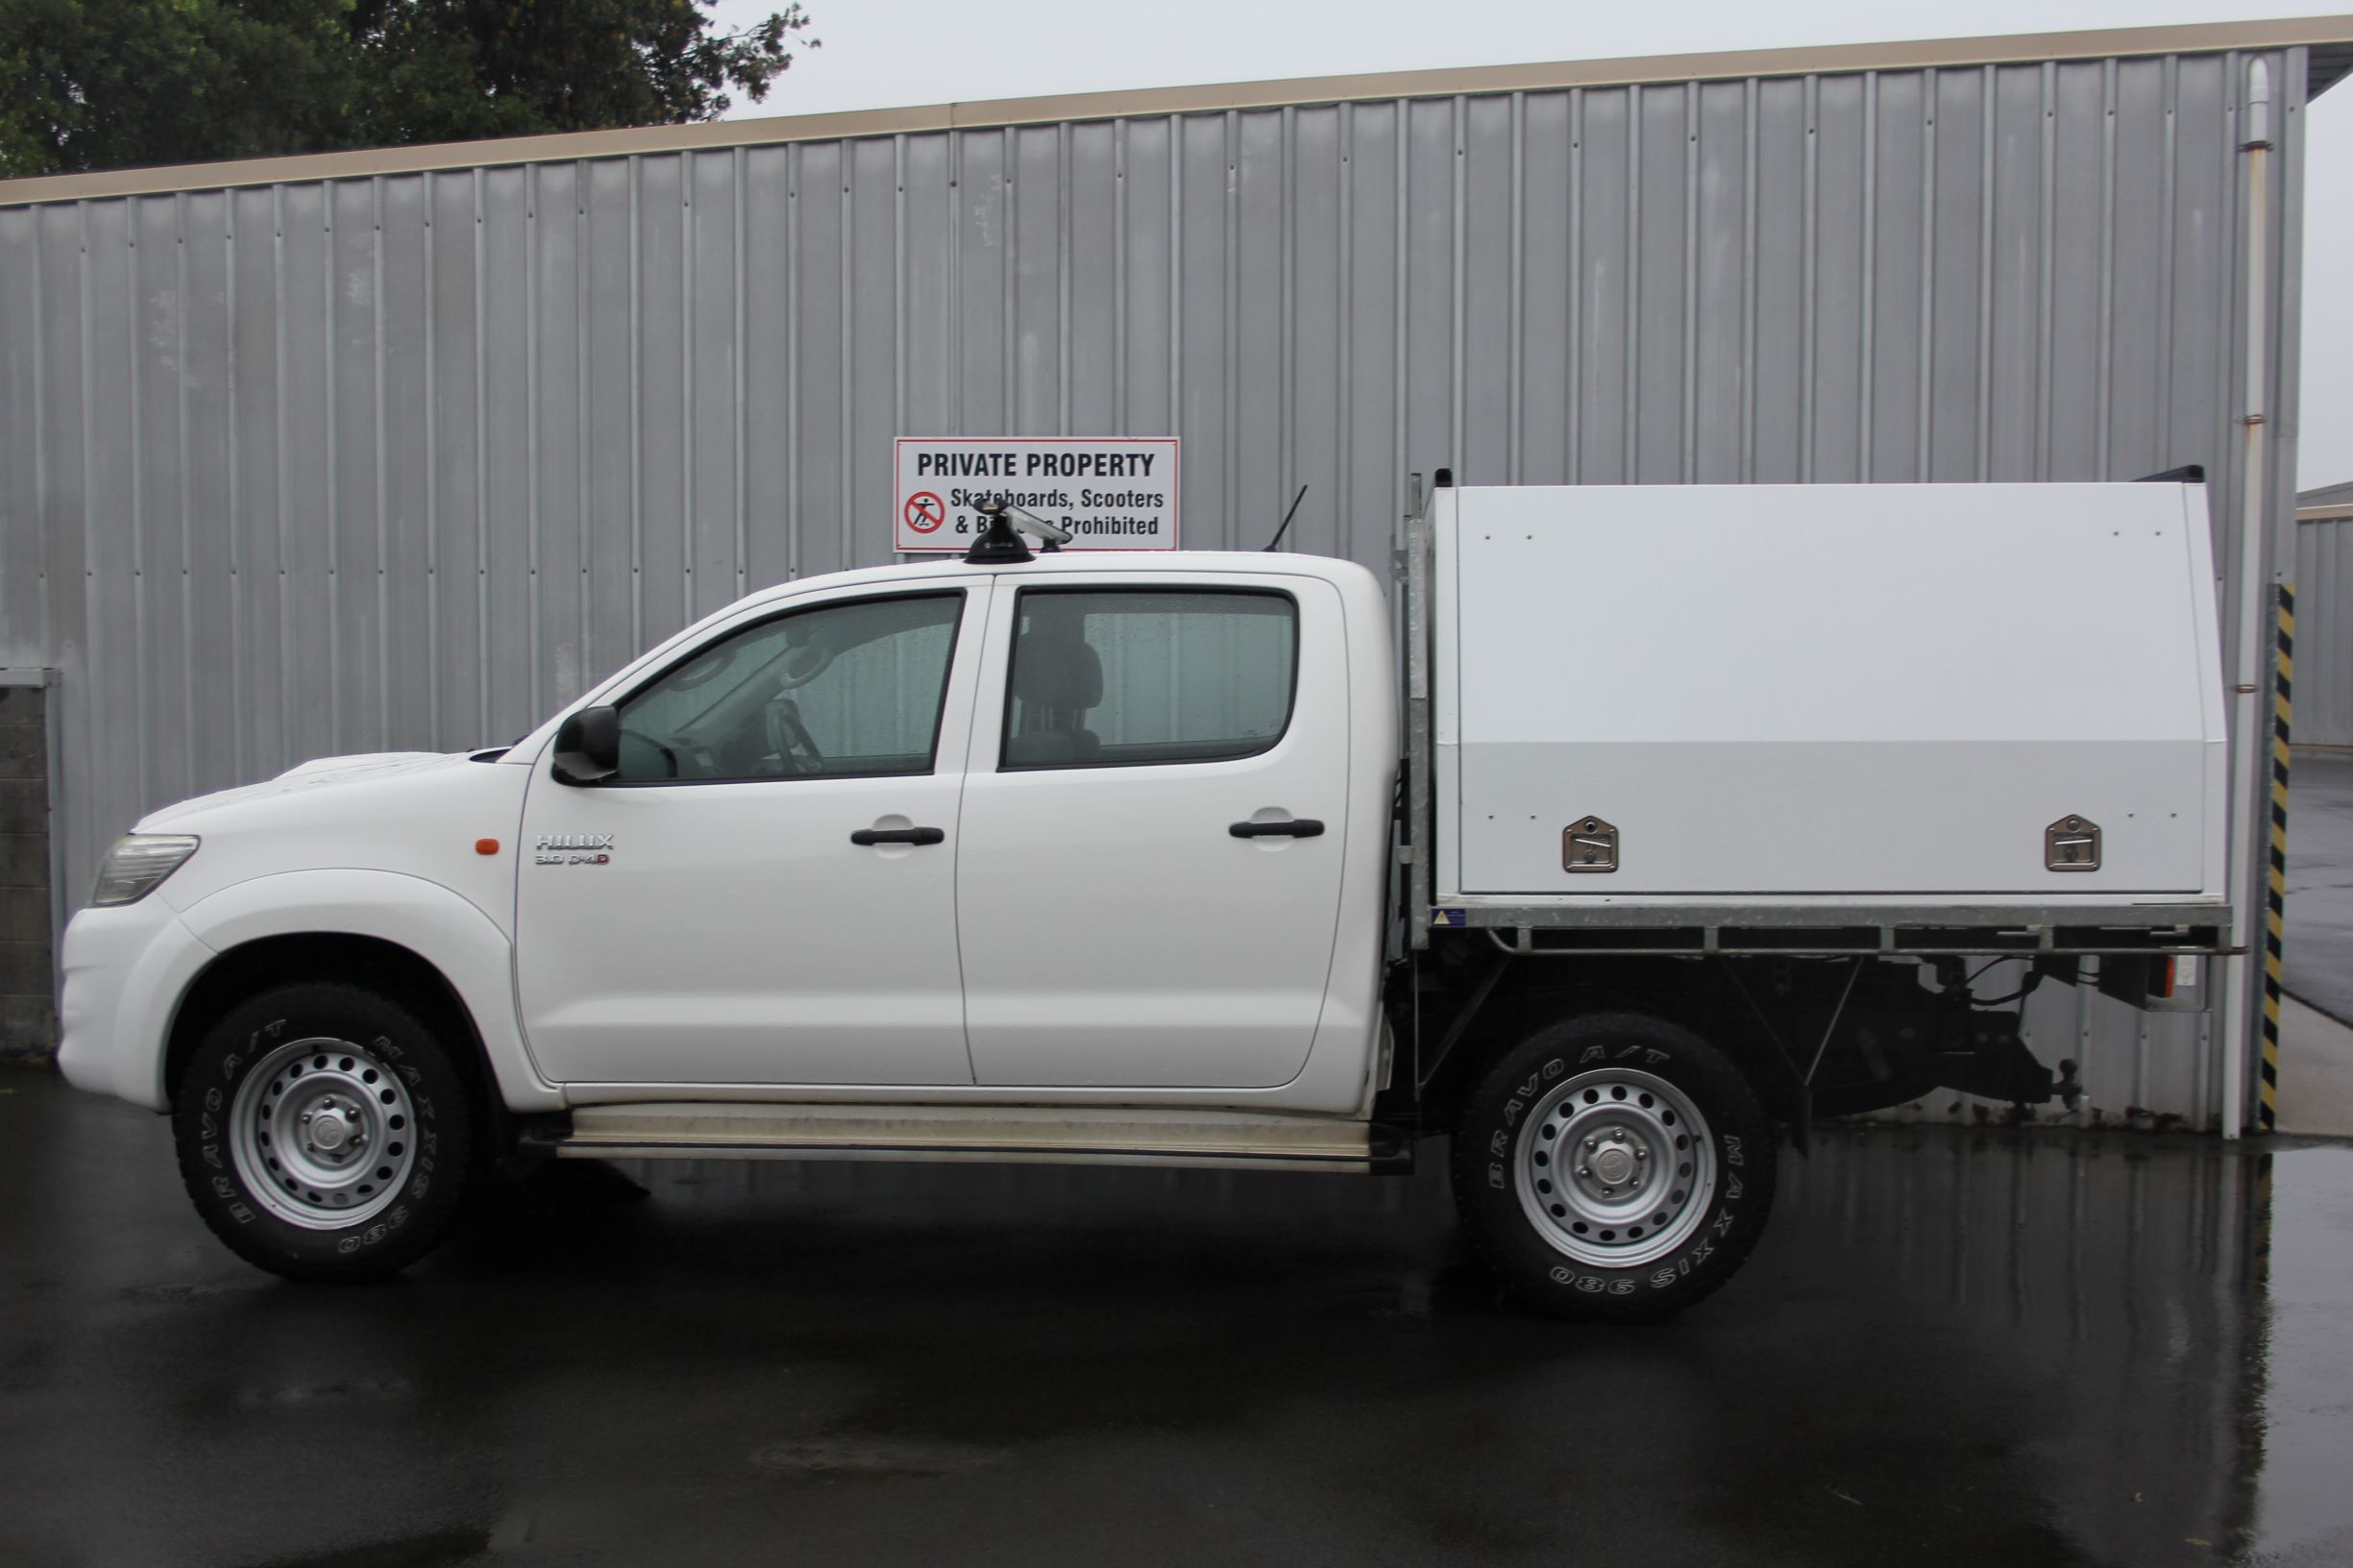 Toyota Hilux 4WD 2013 for sale in Auckland